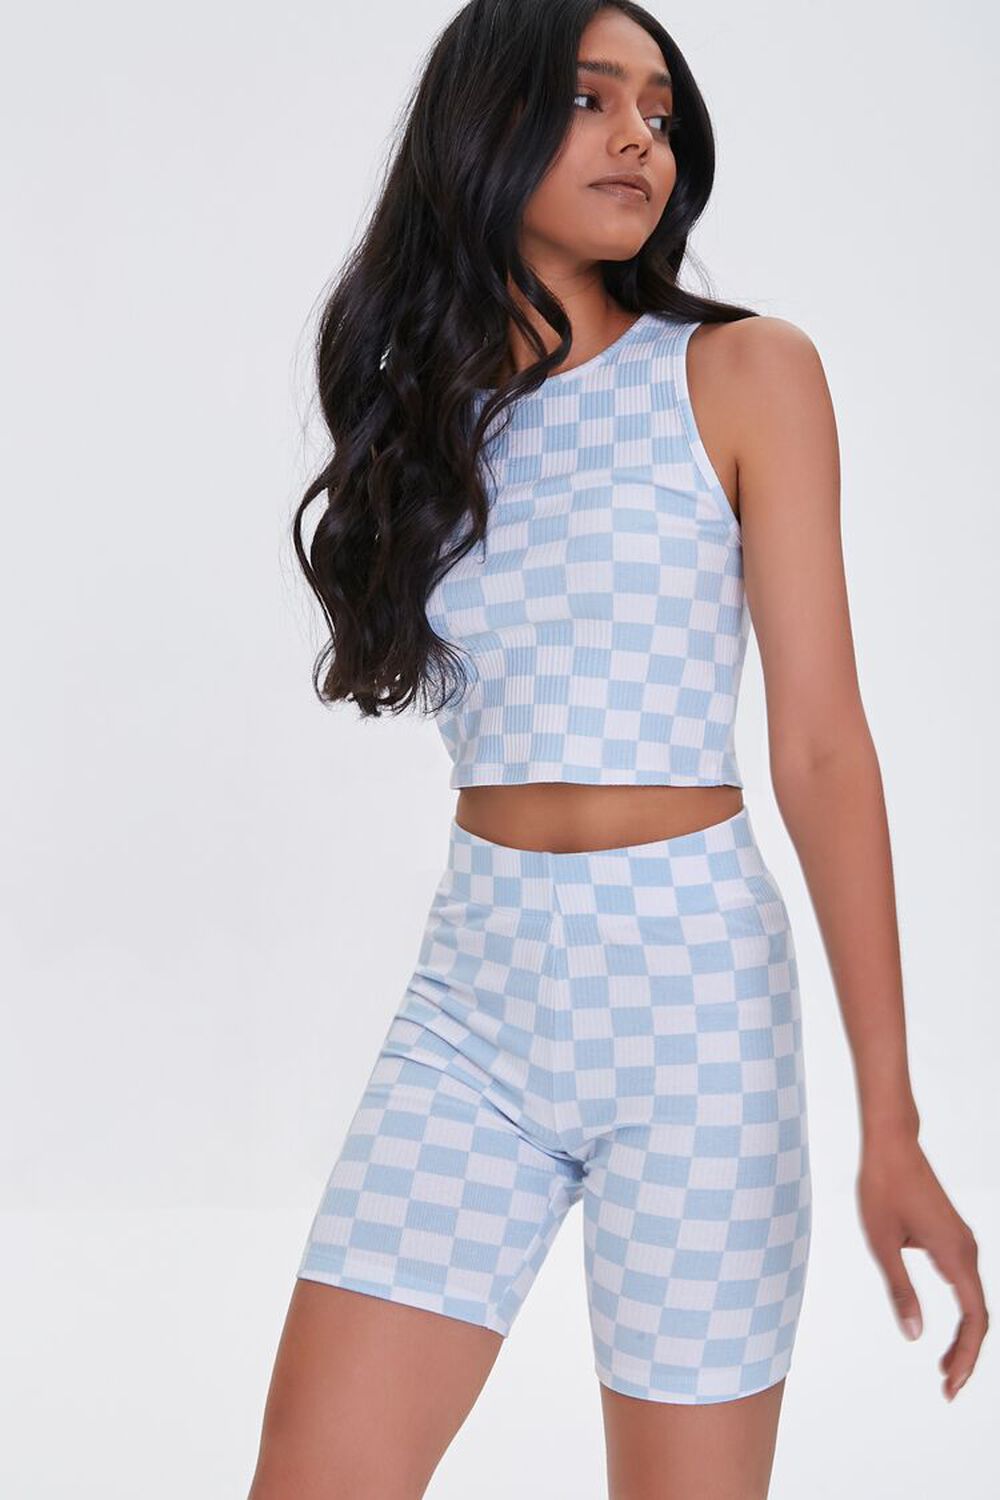 BLUE/WHITE Checkered Crop Top, image 1